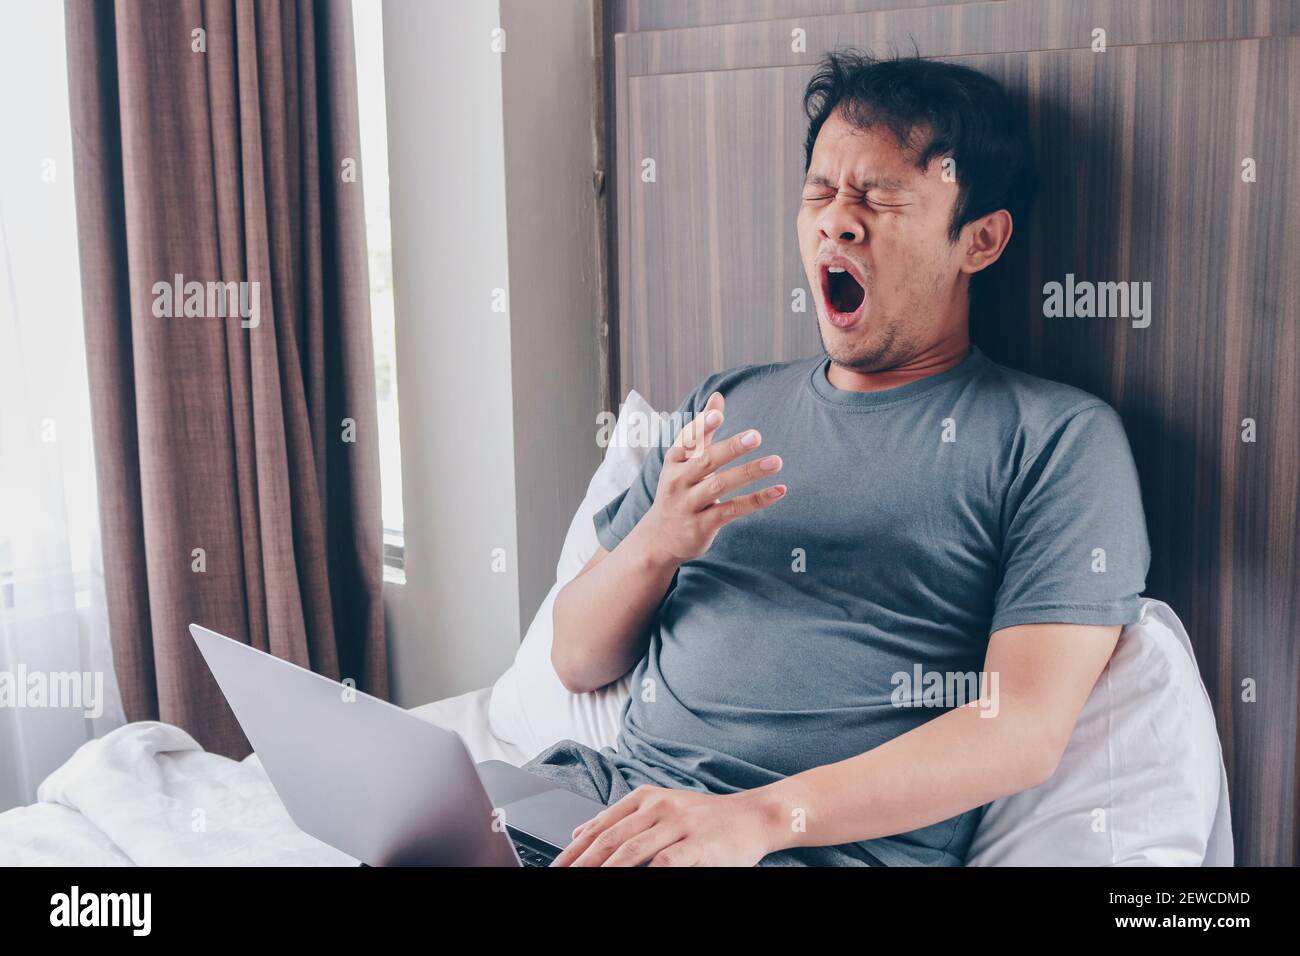 Tired stressed young Asian man feeling sleepy and tired while using laptop on the bed in bedroom. Hard work concept. Stock Photo